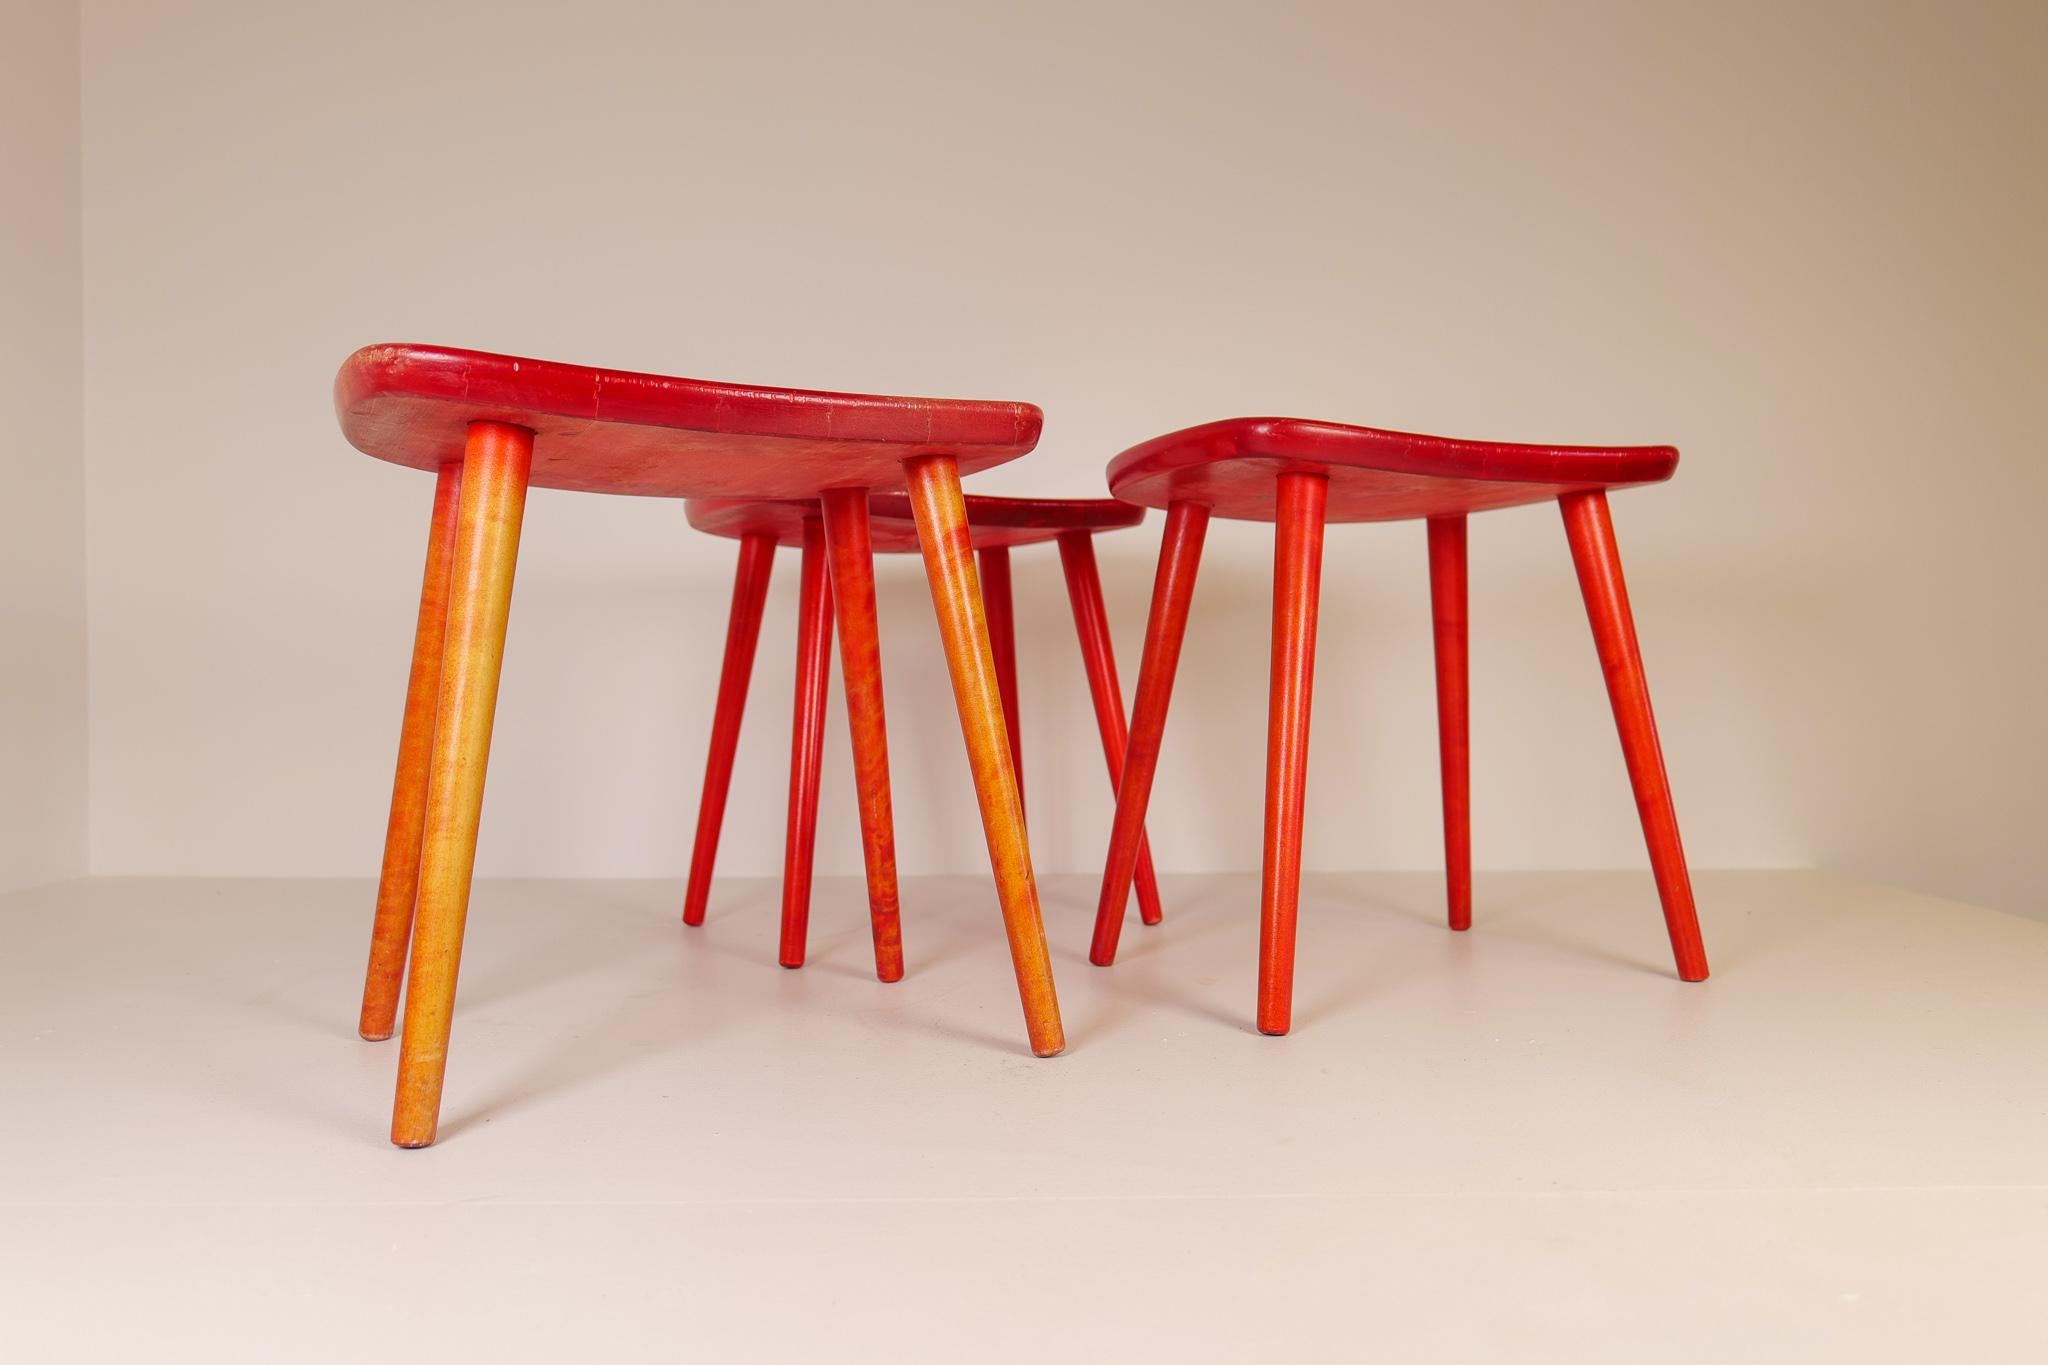 Lacquered Swedish Stools in lacquered Red Birch, Yngve Ekström 